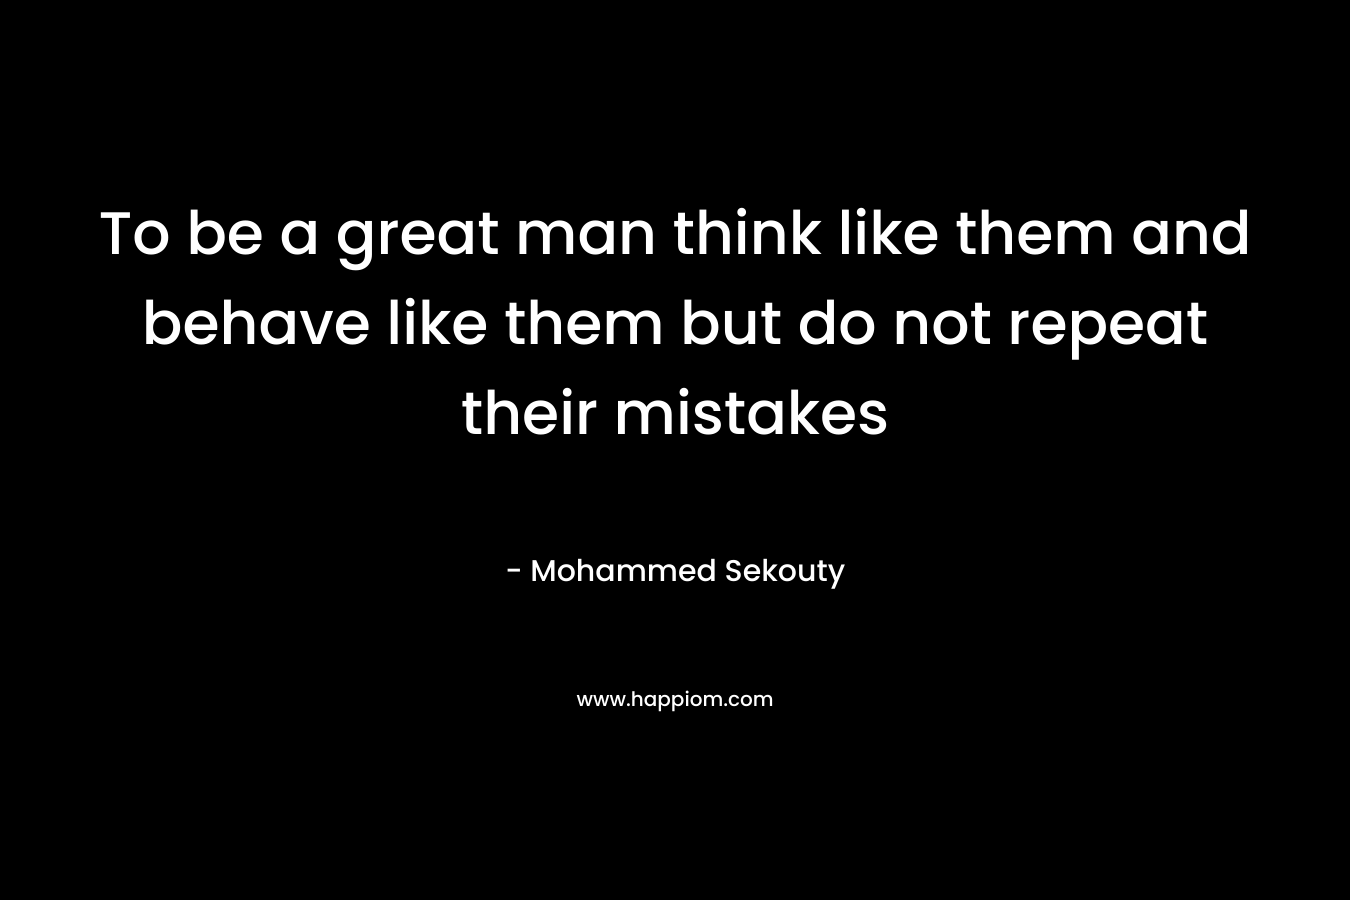 To be a great man think like them and behave like them but do not repeat their mistakes